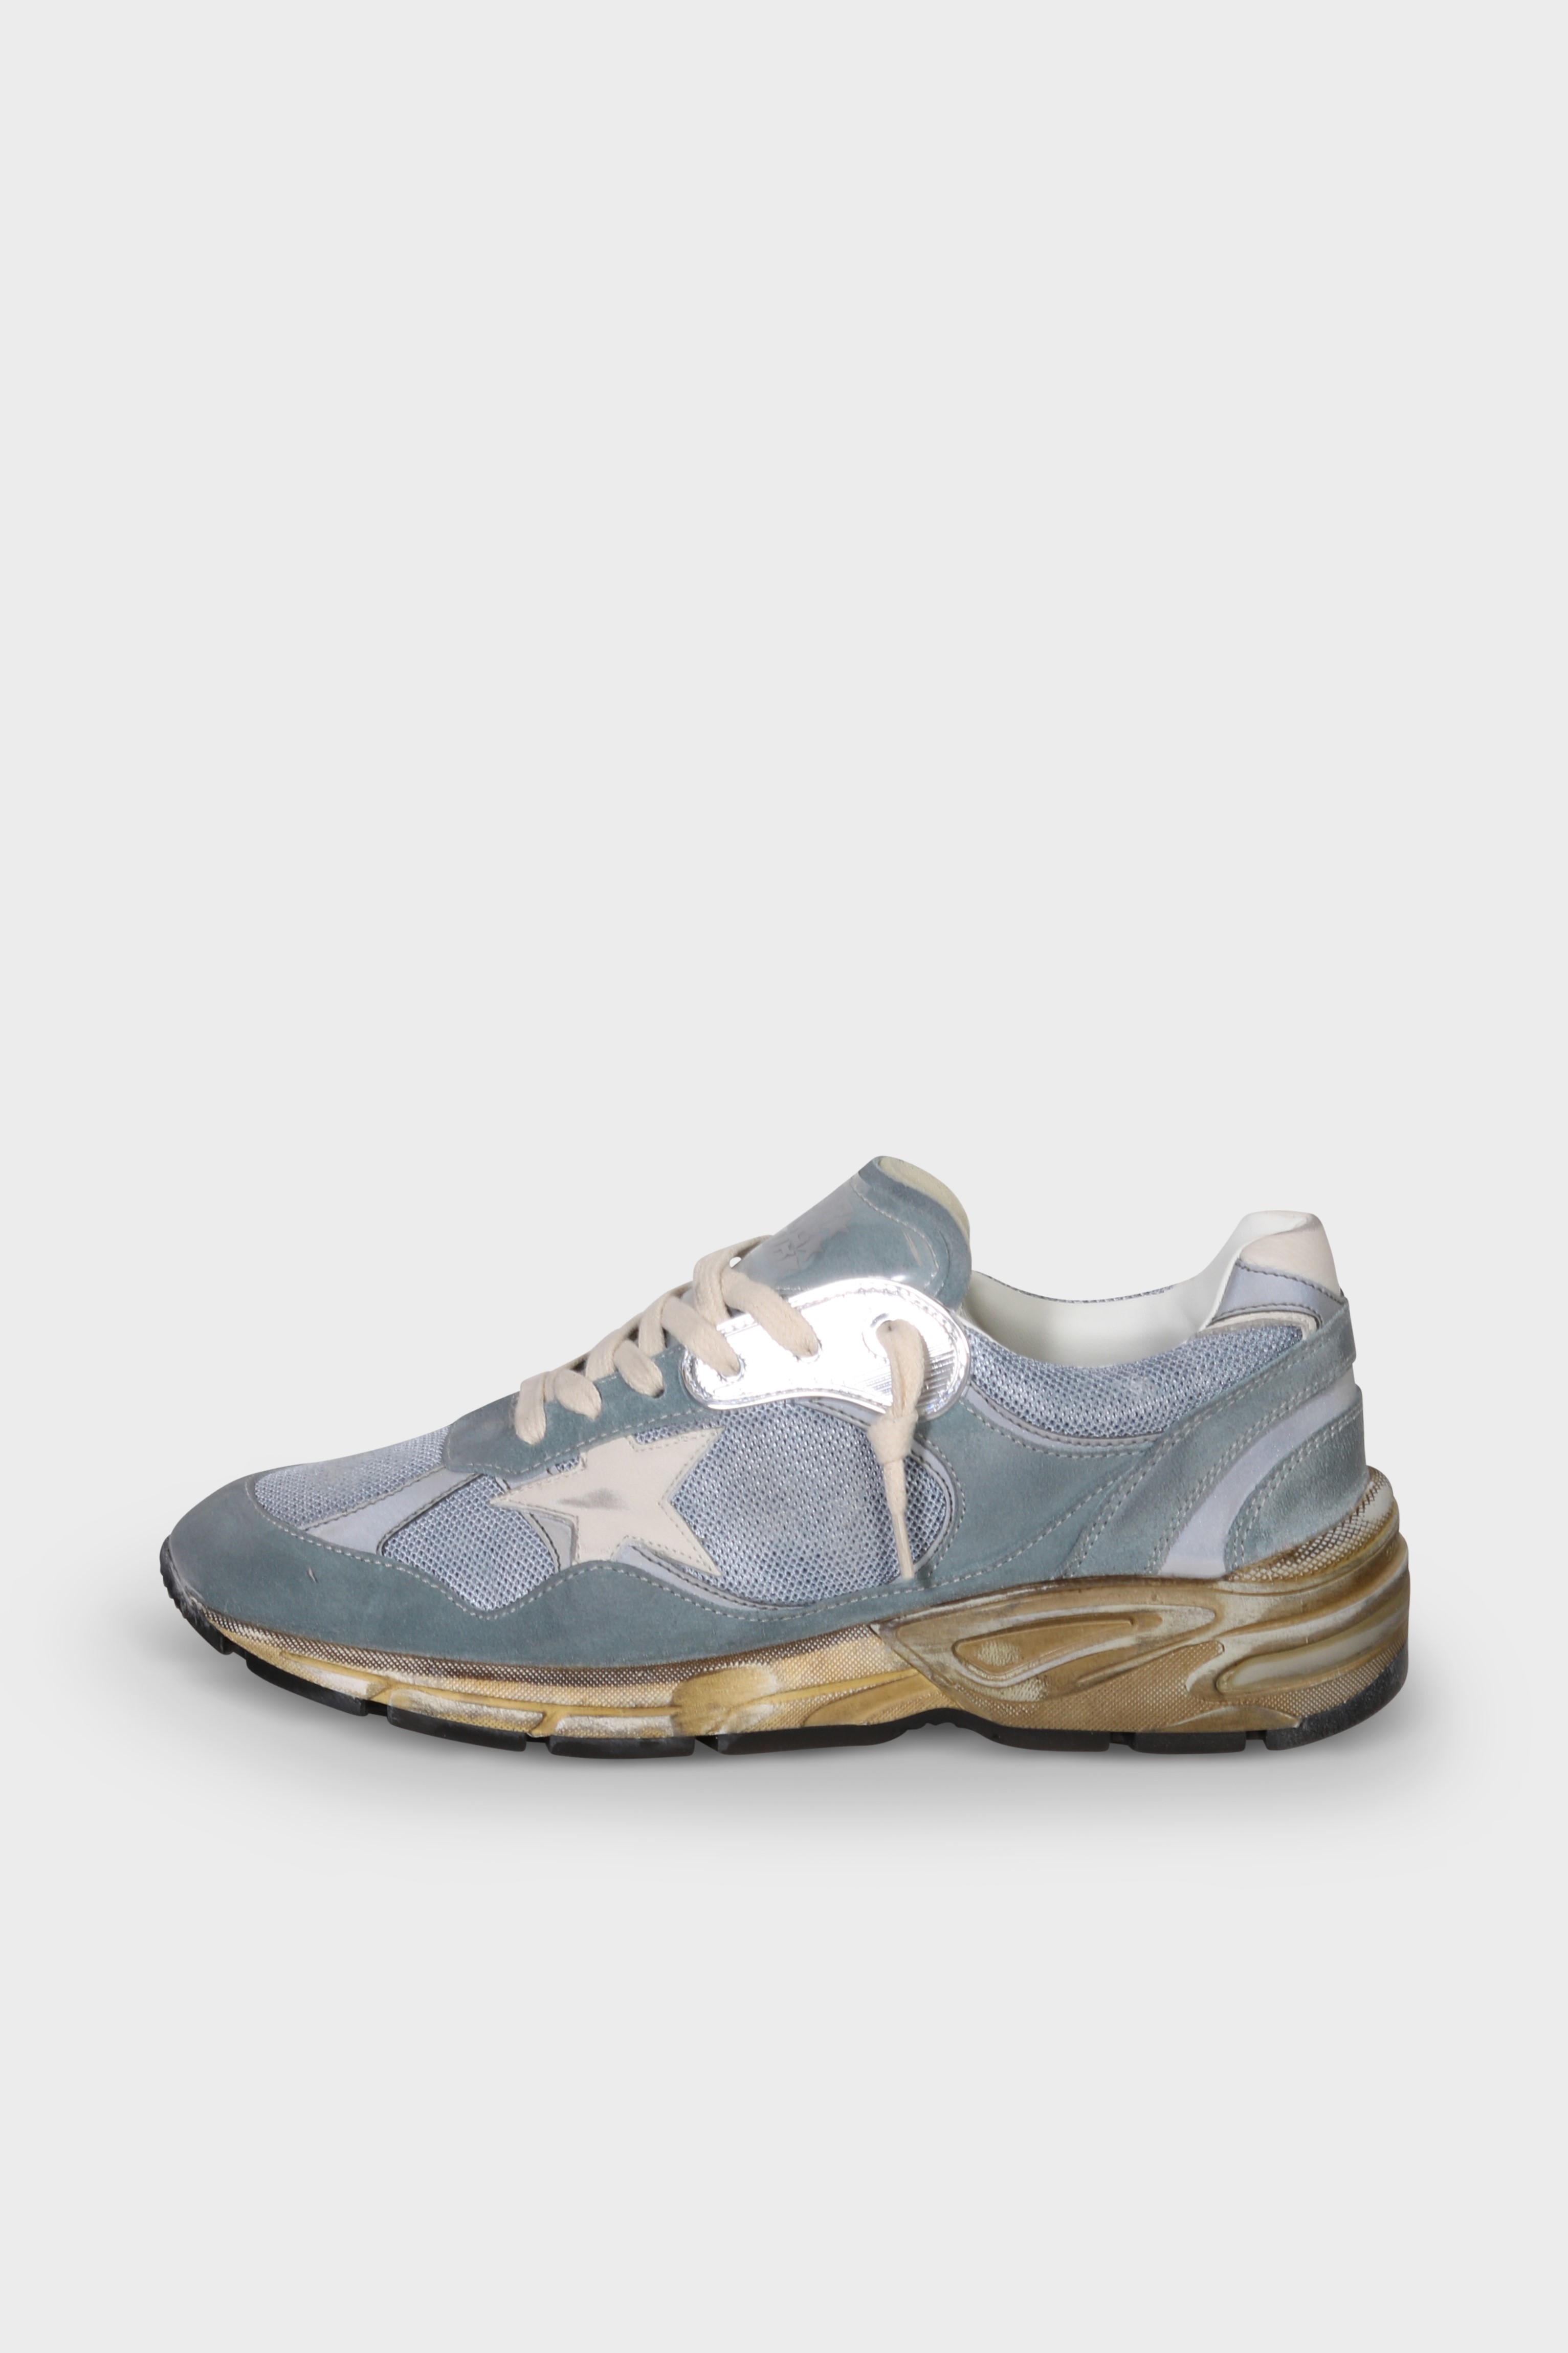 GOLDEN GOOSE Running Dad Net and Suede Blue Silver